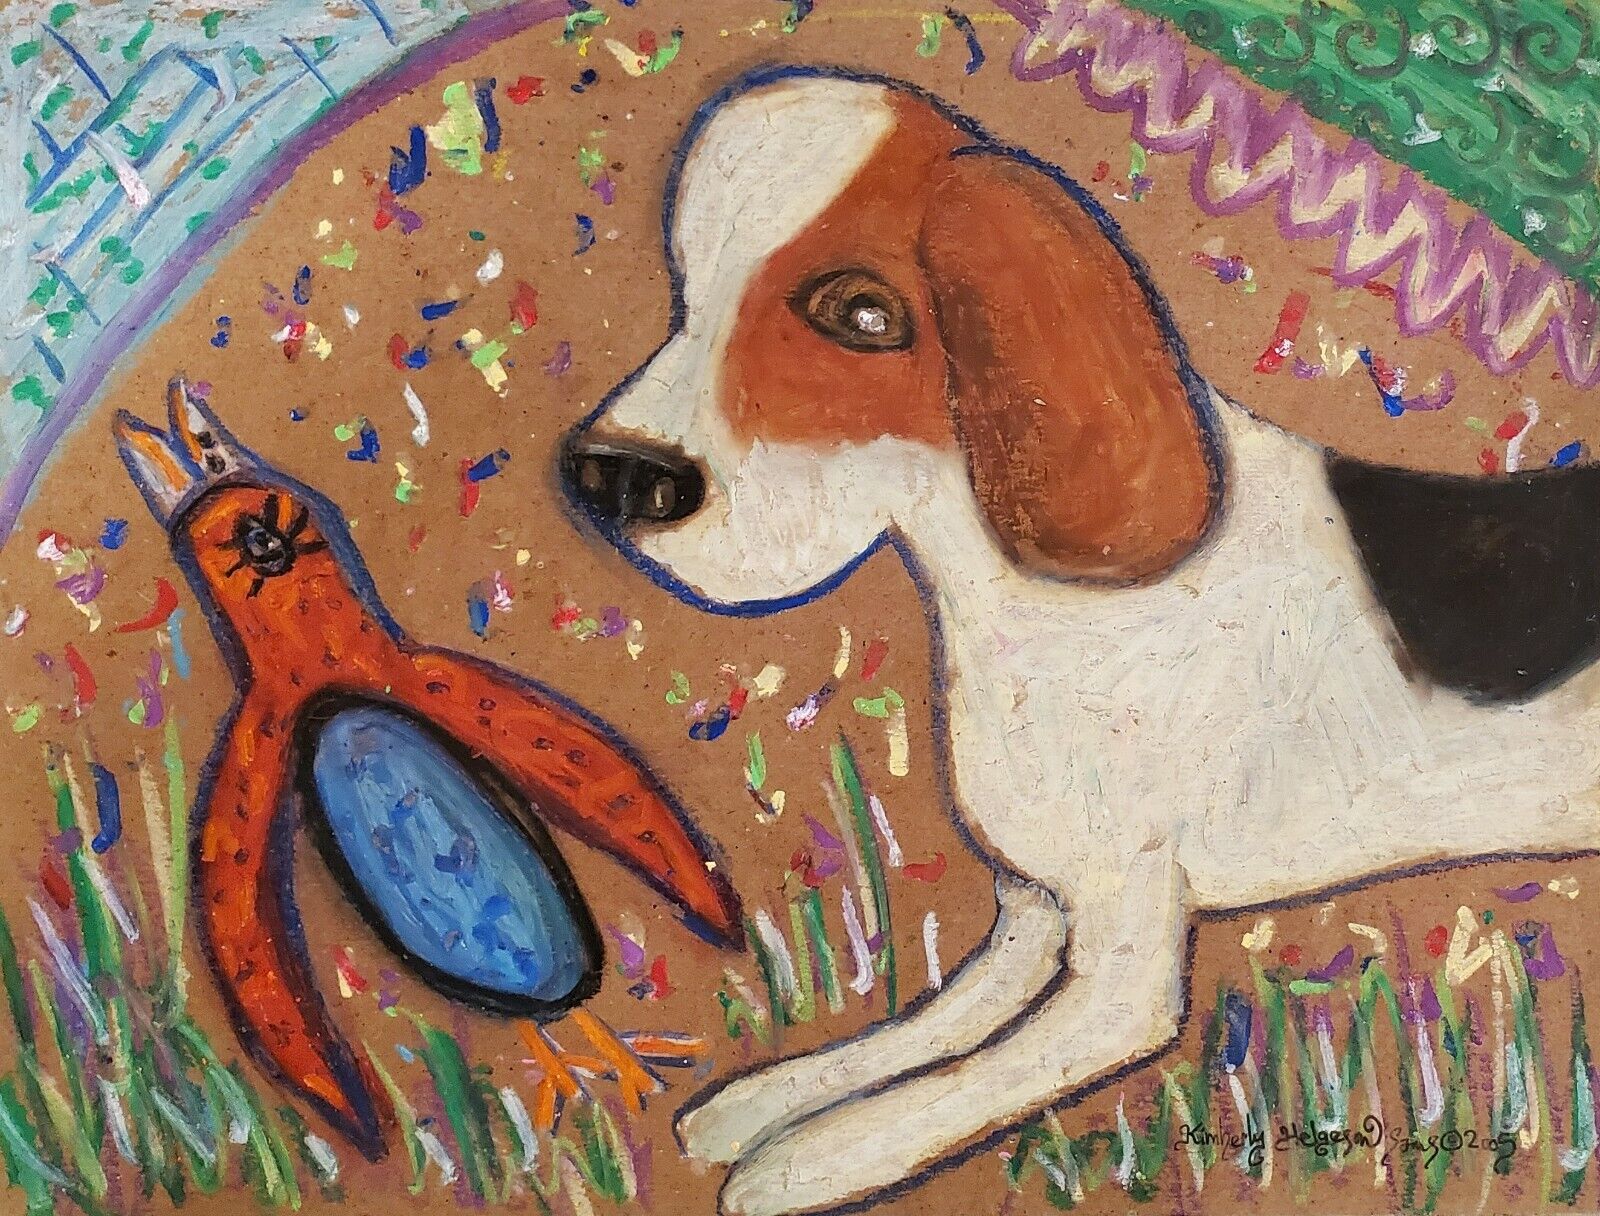 Beagle Art Print from Painting | Beagle Gift, Poster, Picture, Home Decor 11x14